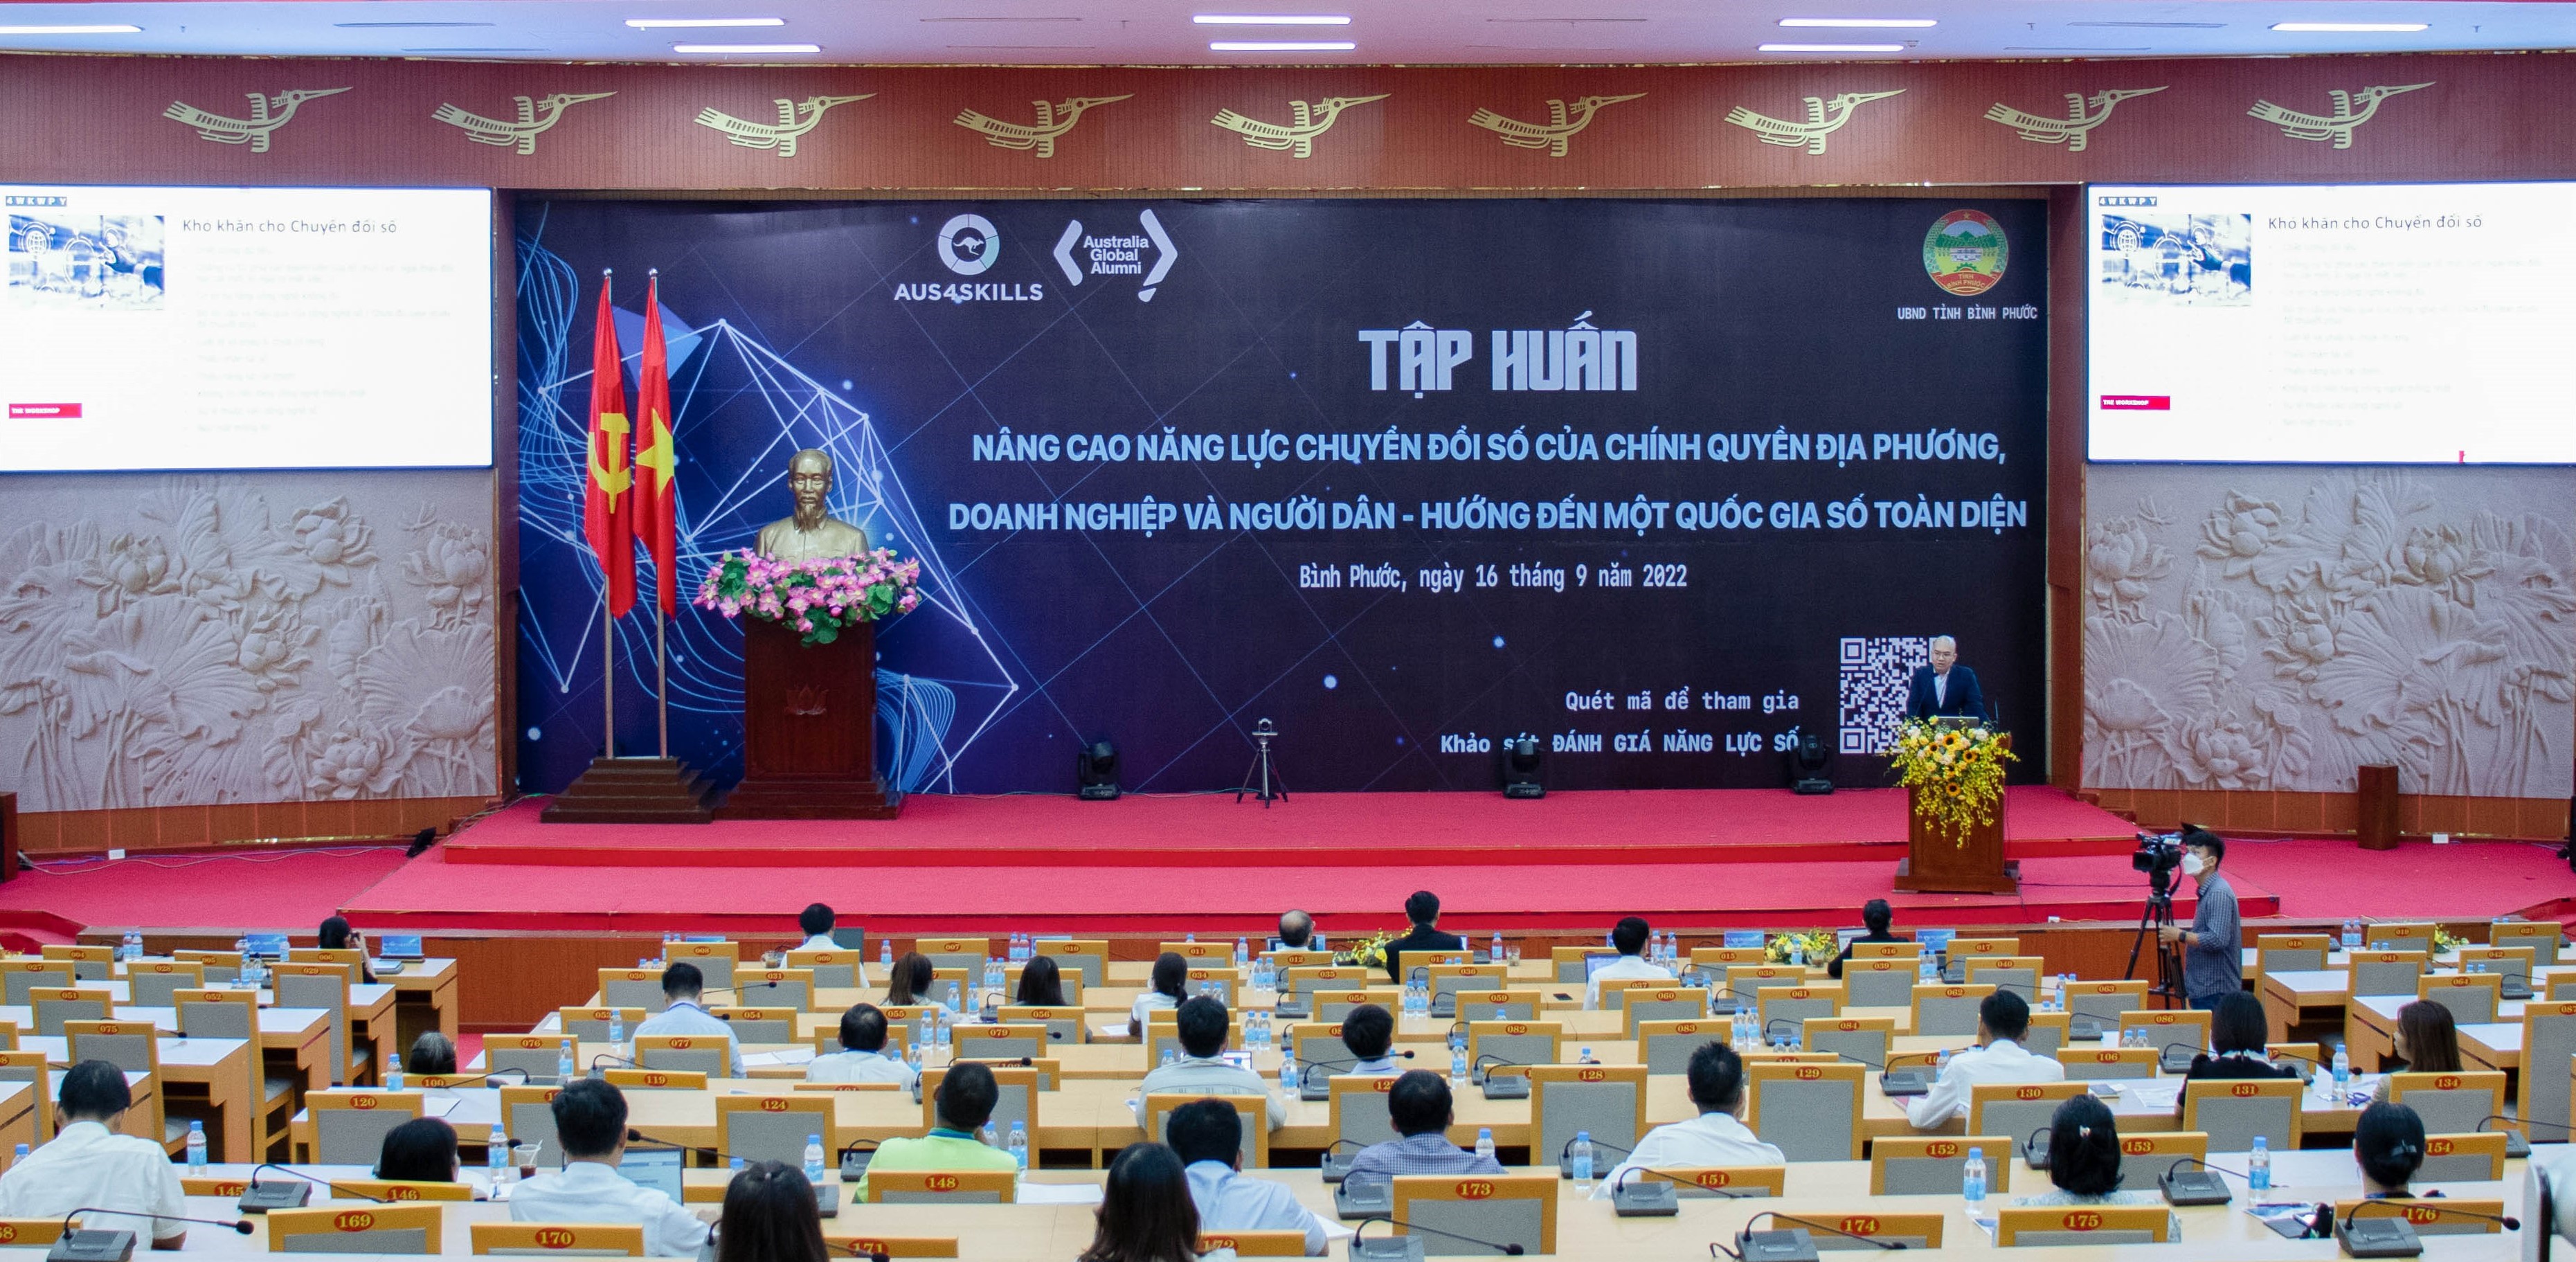 Digital Transformation training for more than 4,000 participants who are citizens, business representatives, and government officials in Binh Phuoc province in 2022